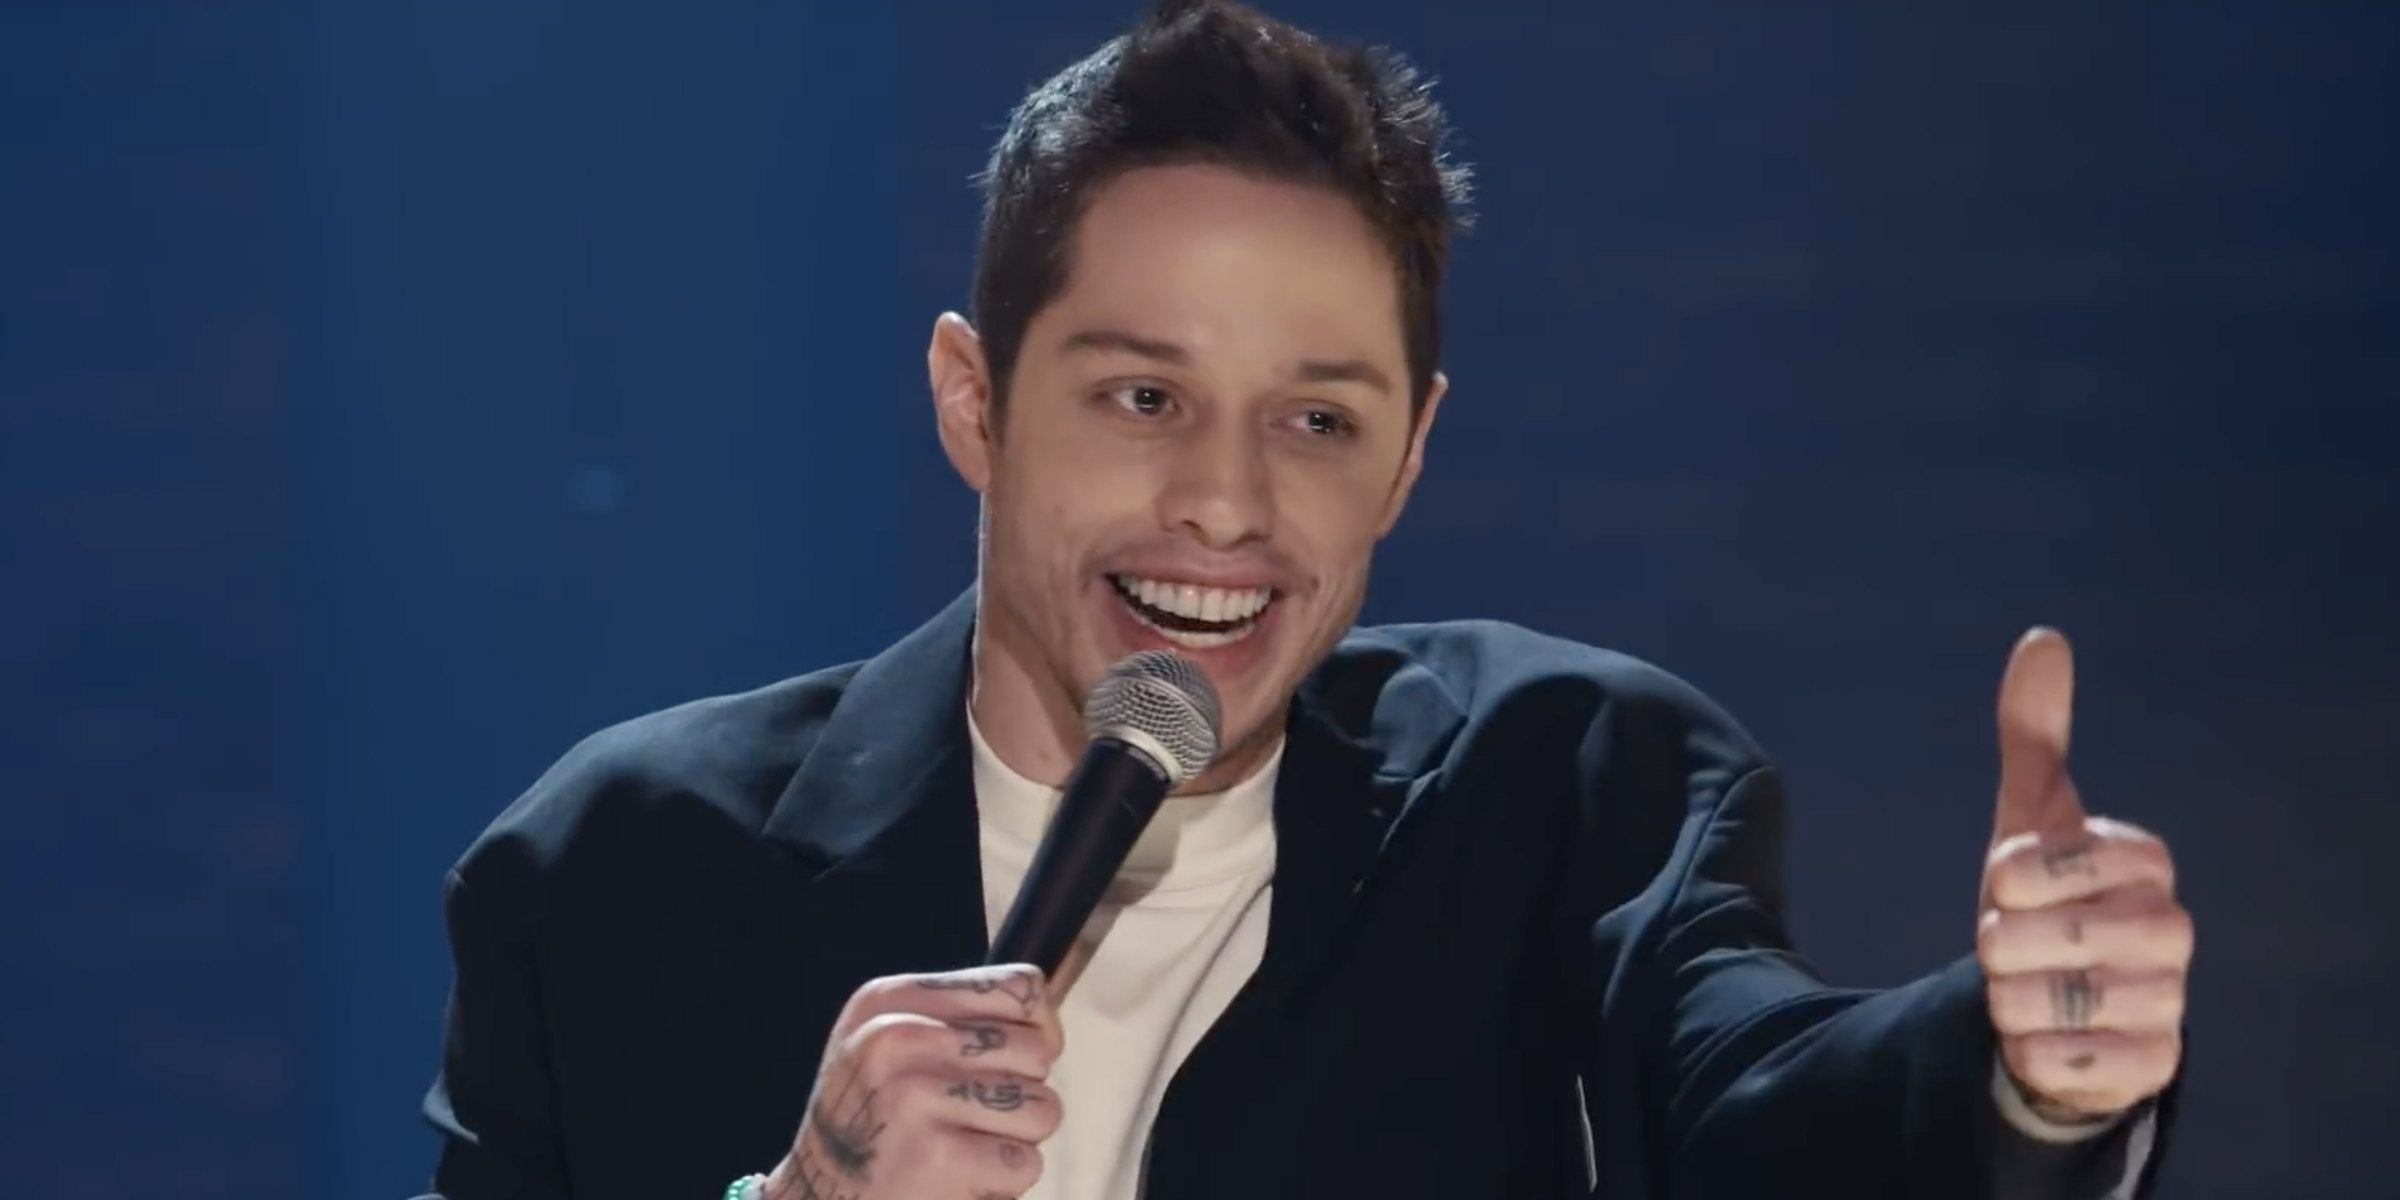 Pete Davidson in Pete Davidson: Alive From New York on Netflix